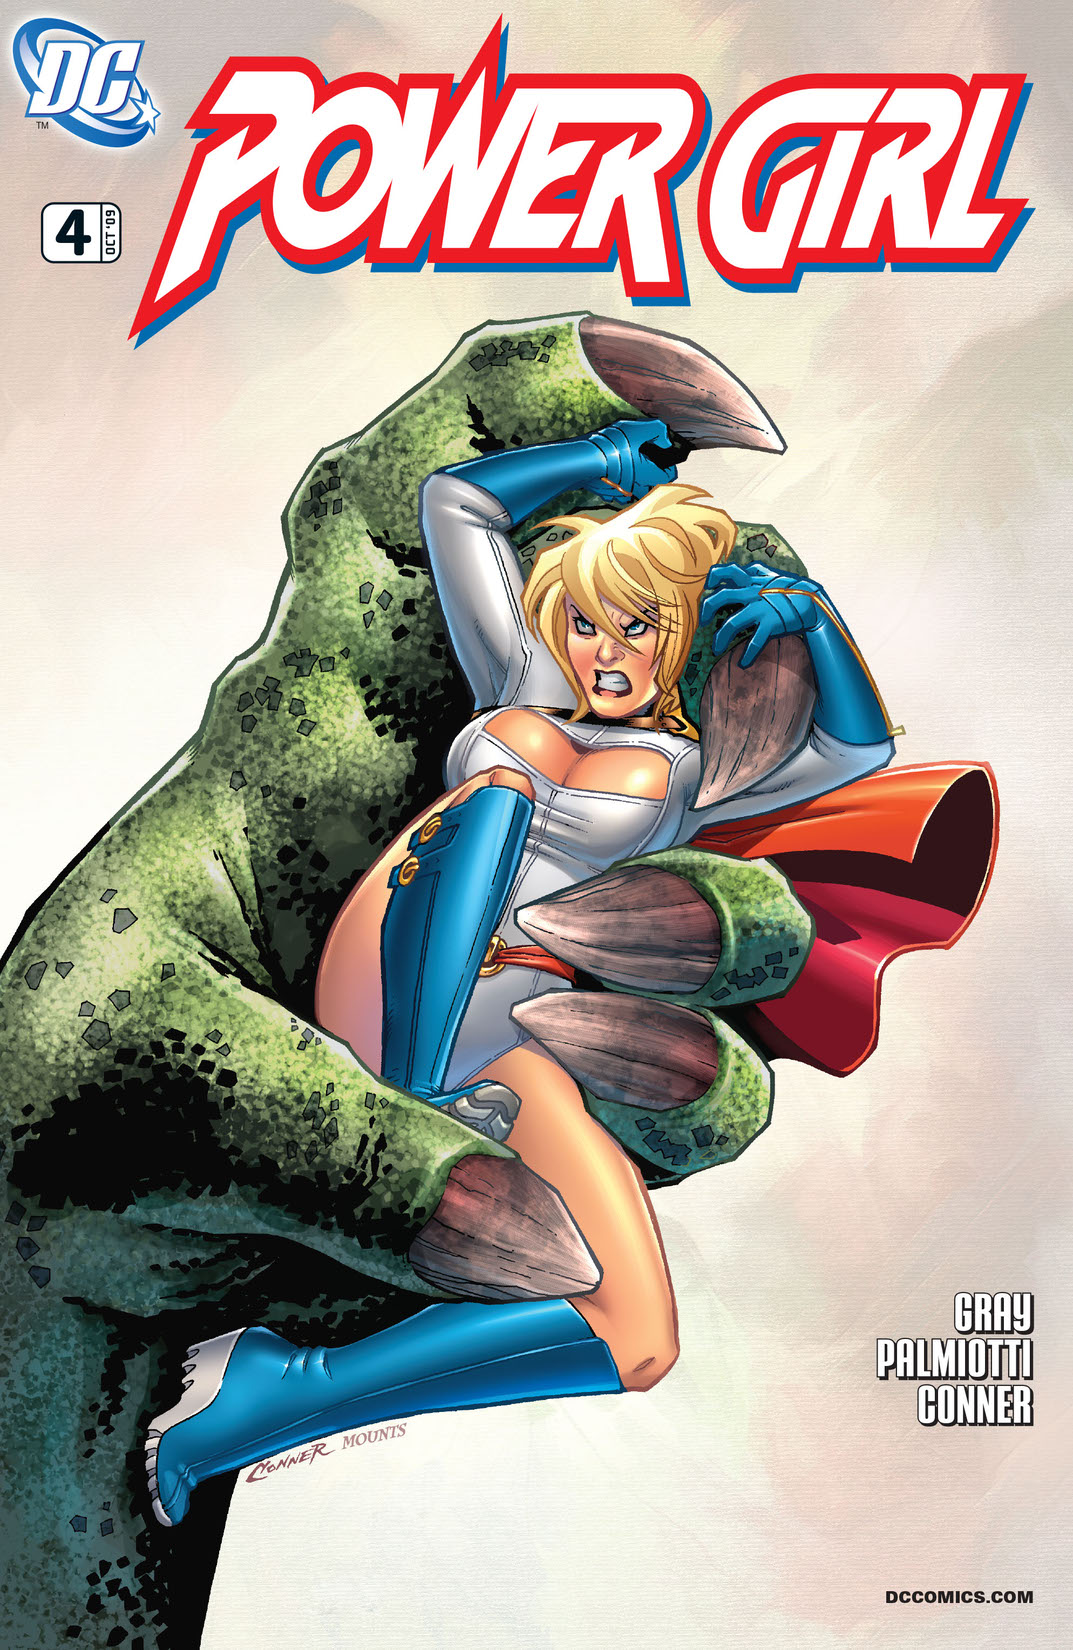 Power Girl (2009-) #4 preview images